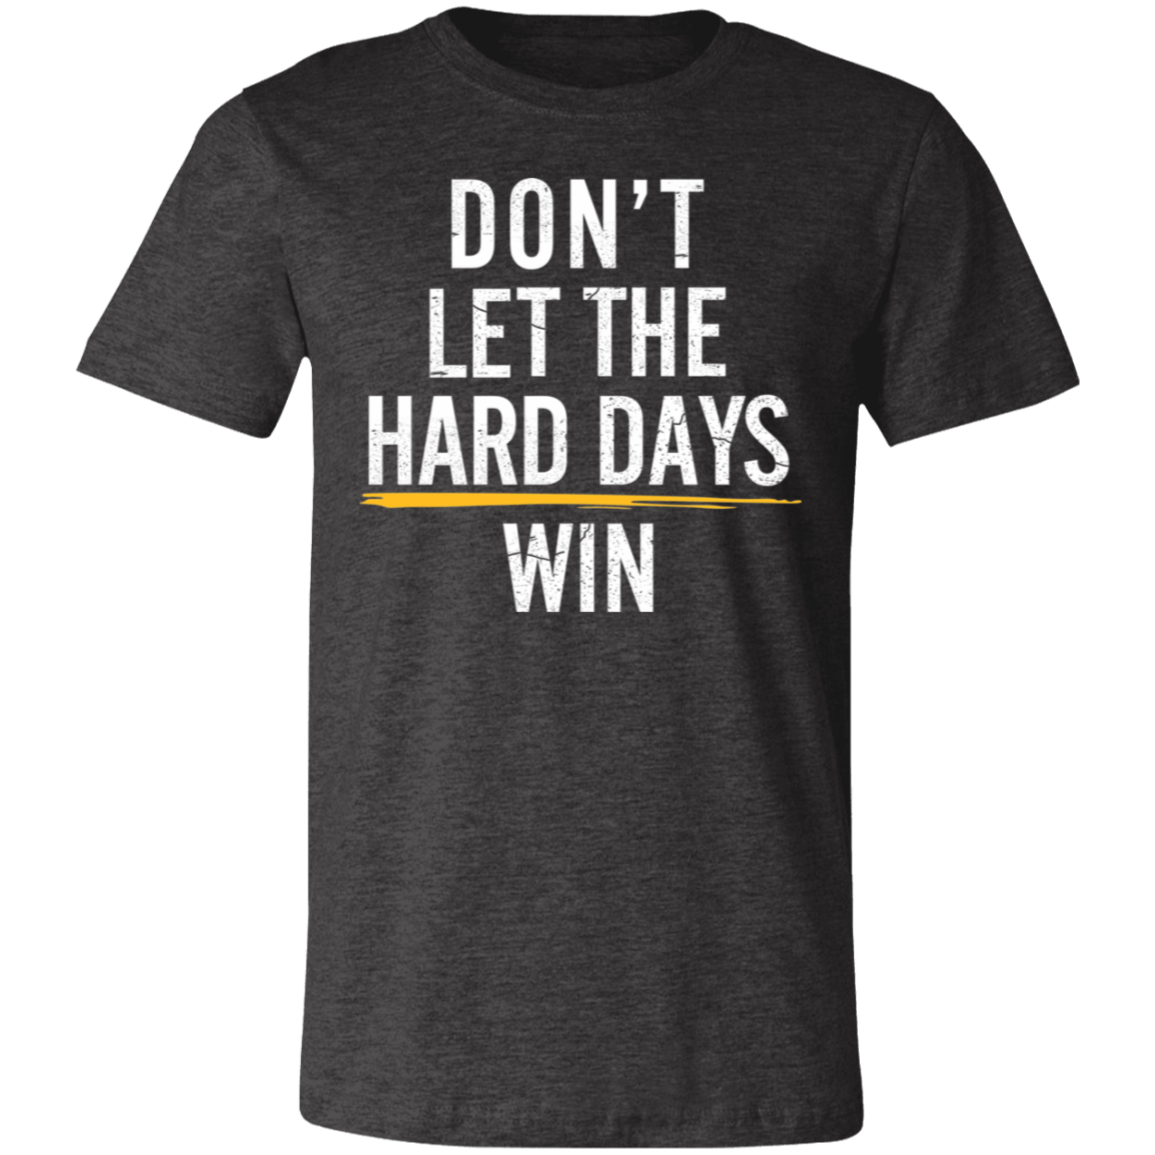 Don't let the hard day win Premium Women's Tee